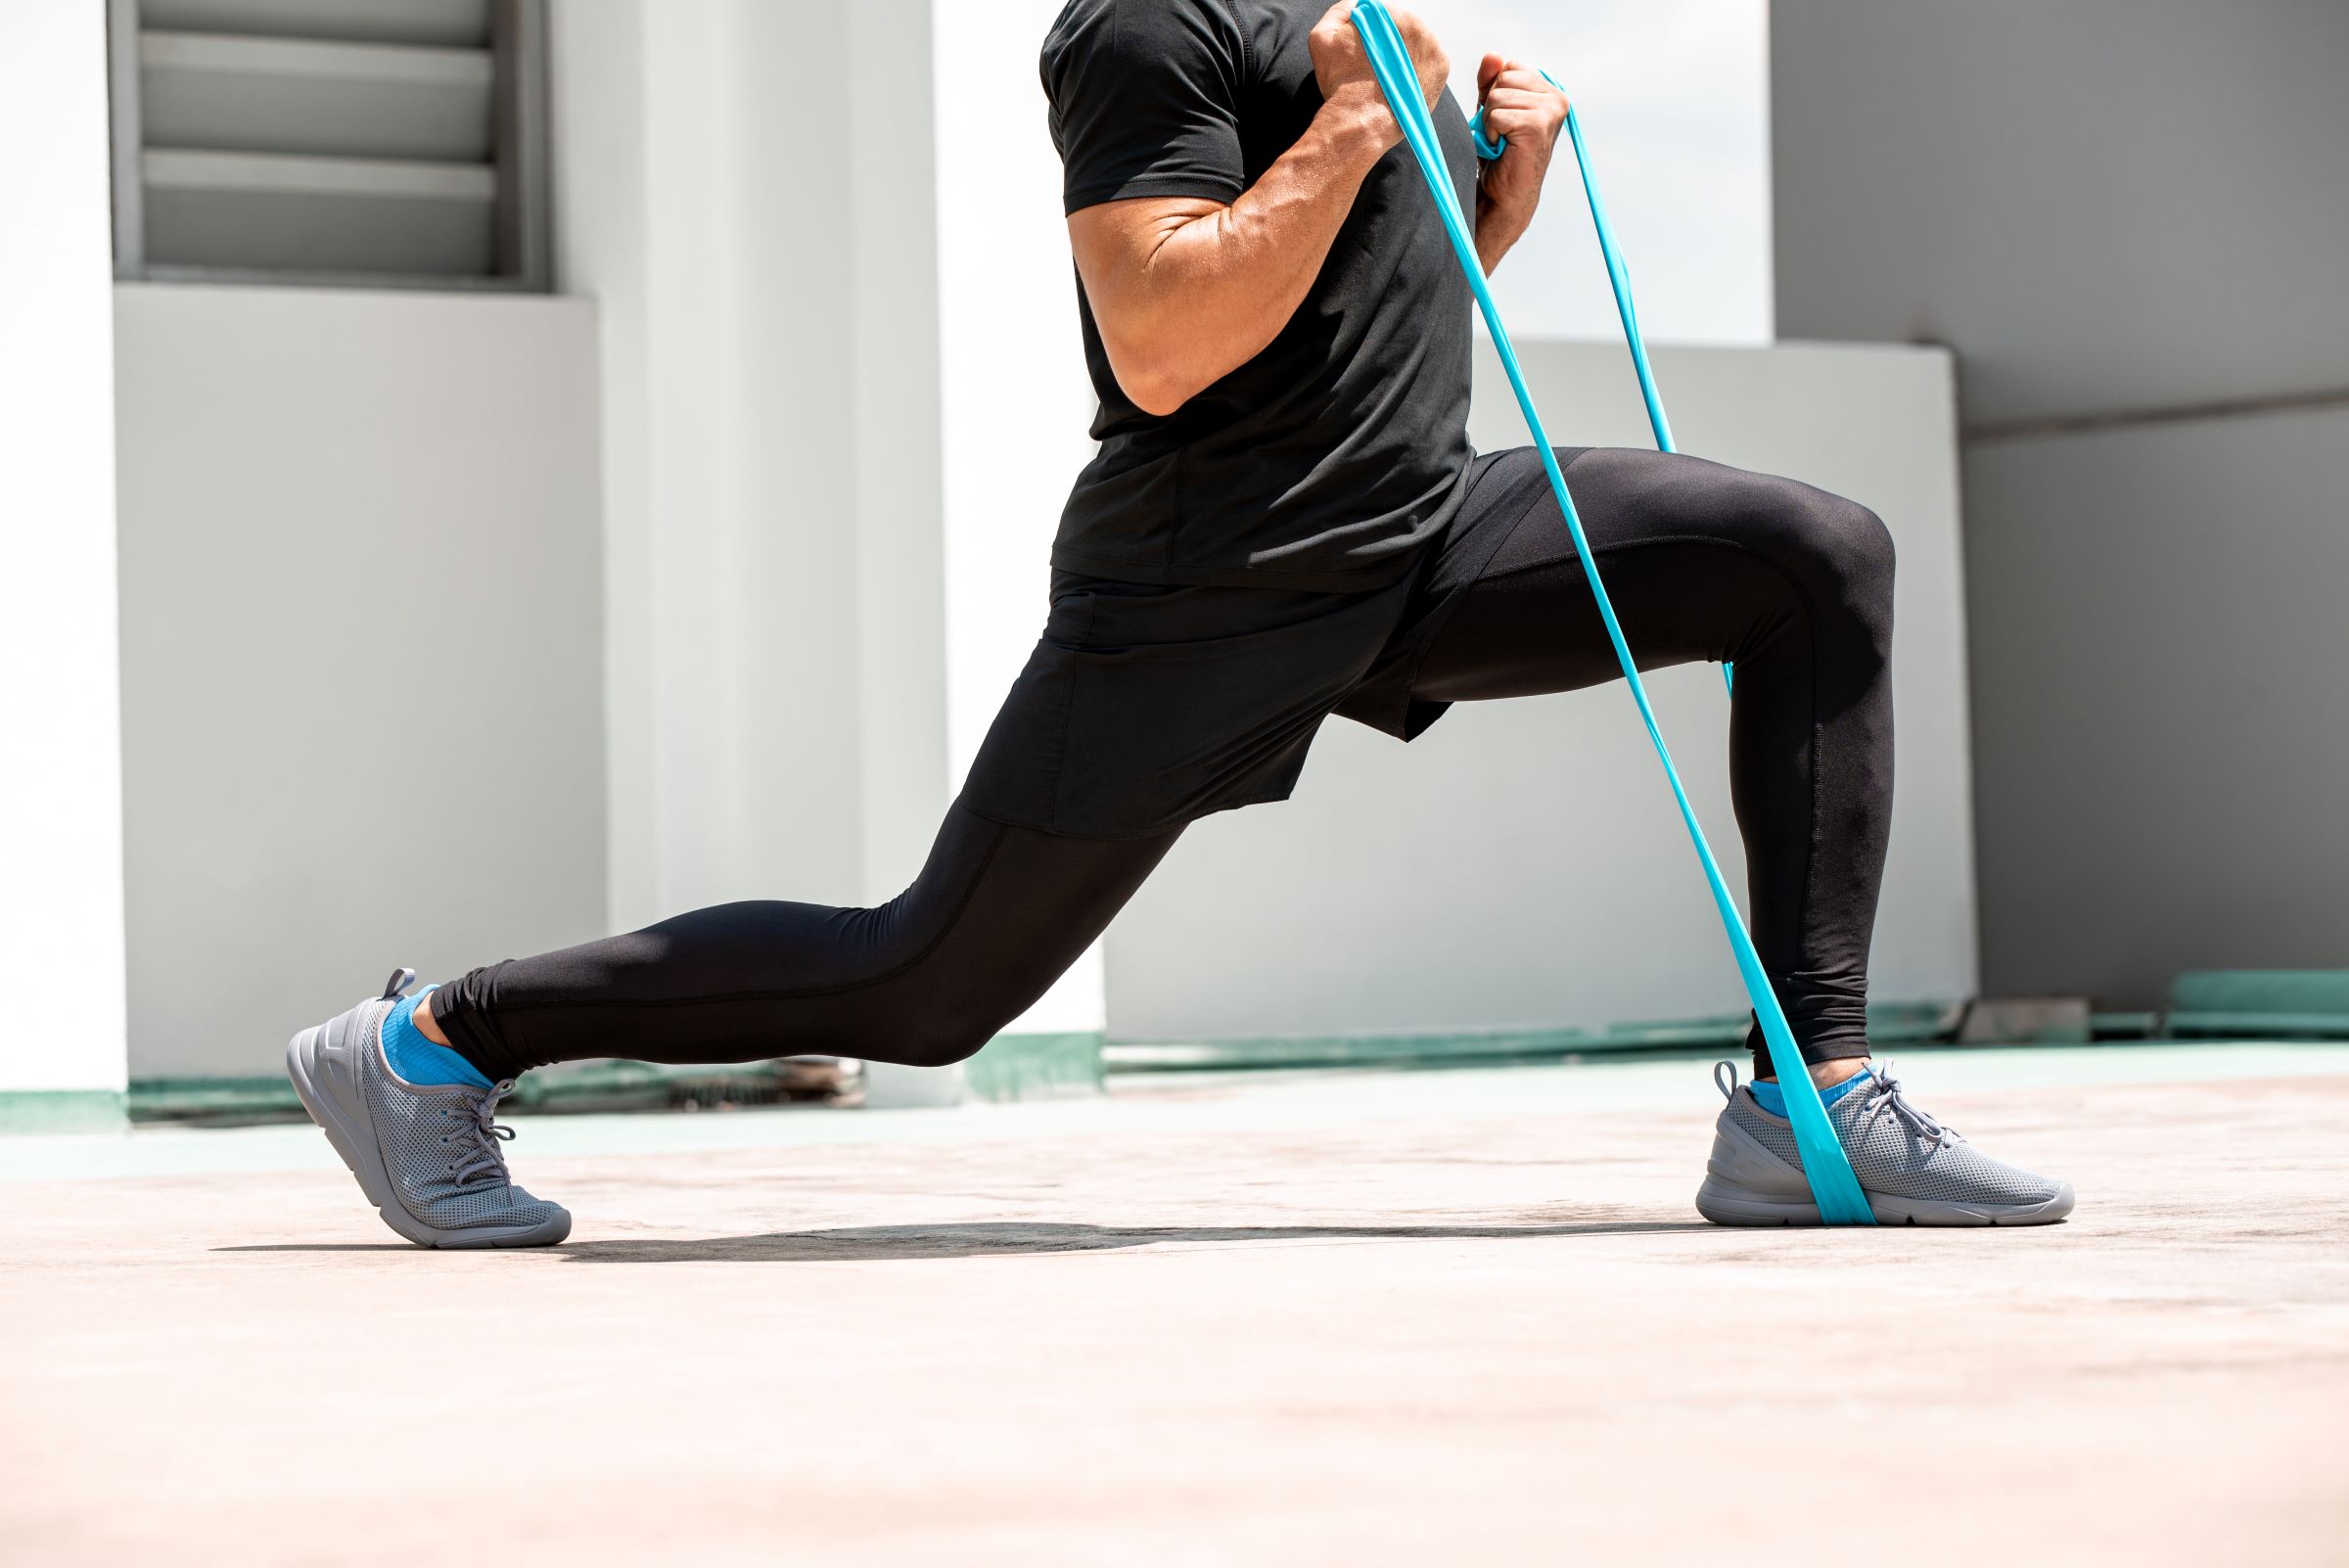 https://www.themanual.com/wp-content/uploads/sites/9/2024/01/man-doing-lunge-exercise-with-resistance-band-indoors-adobe-stock-Atstock-Productions.jpg?fit=2400%2C1602&p=1